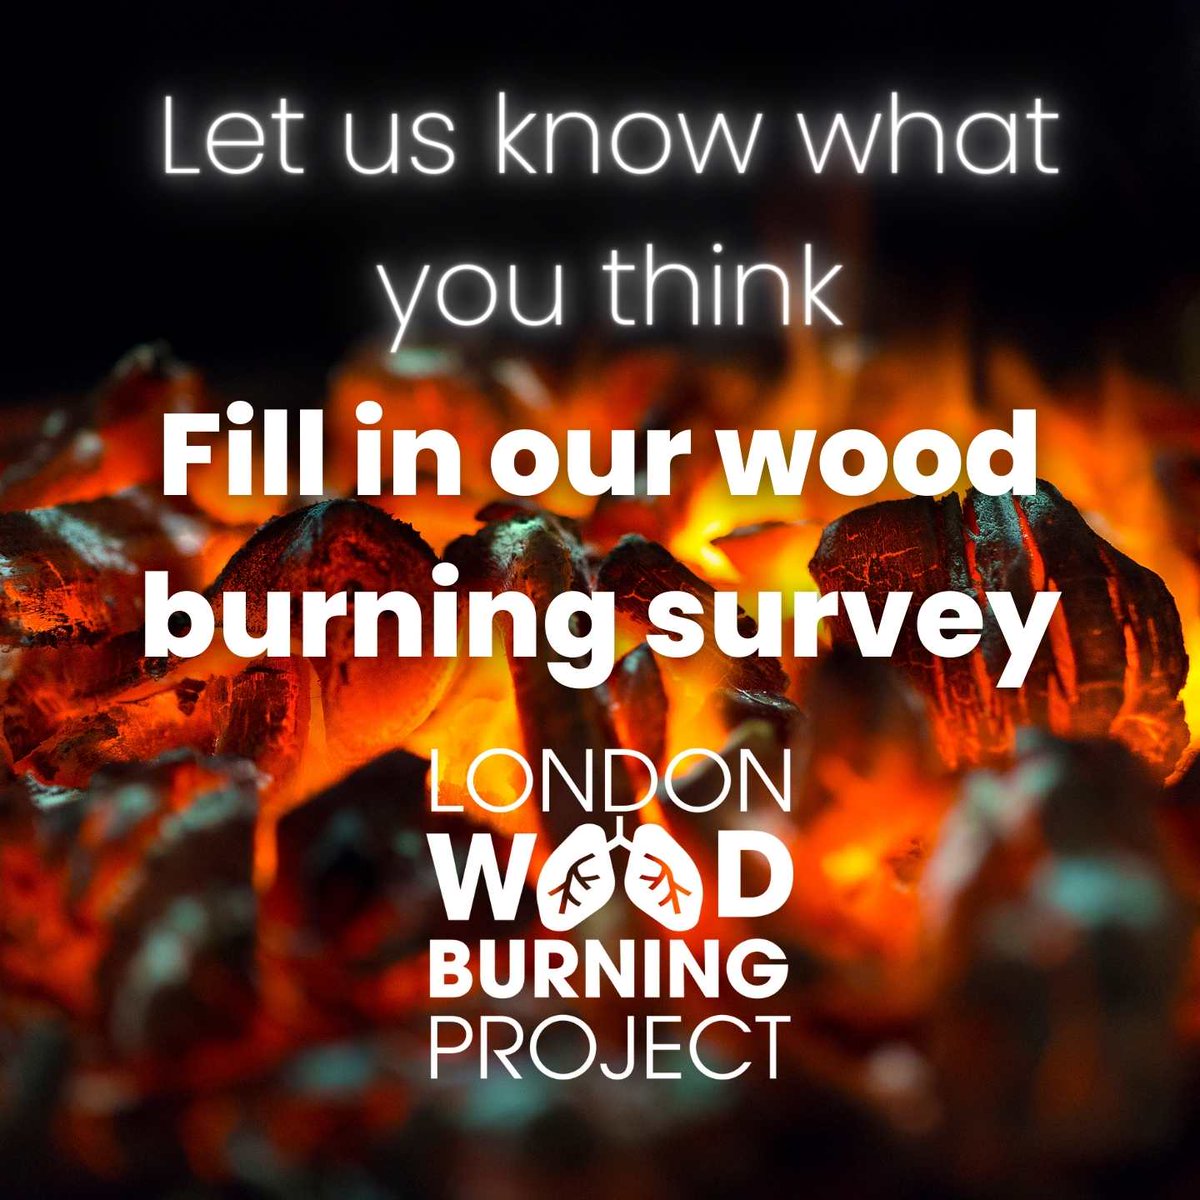 Please complete the London Wood Burning Project survey and give us your input on wood burning and air quality in London, tinyurl.com/456nk5e7 #woodburning #woodburninglondon #pollution #airpollution #airquality #londonair #cleanair #survey #woodburningsurvey